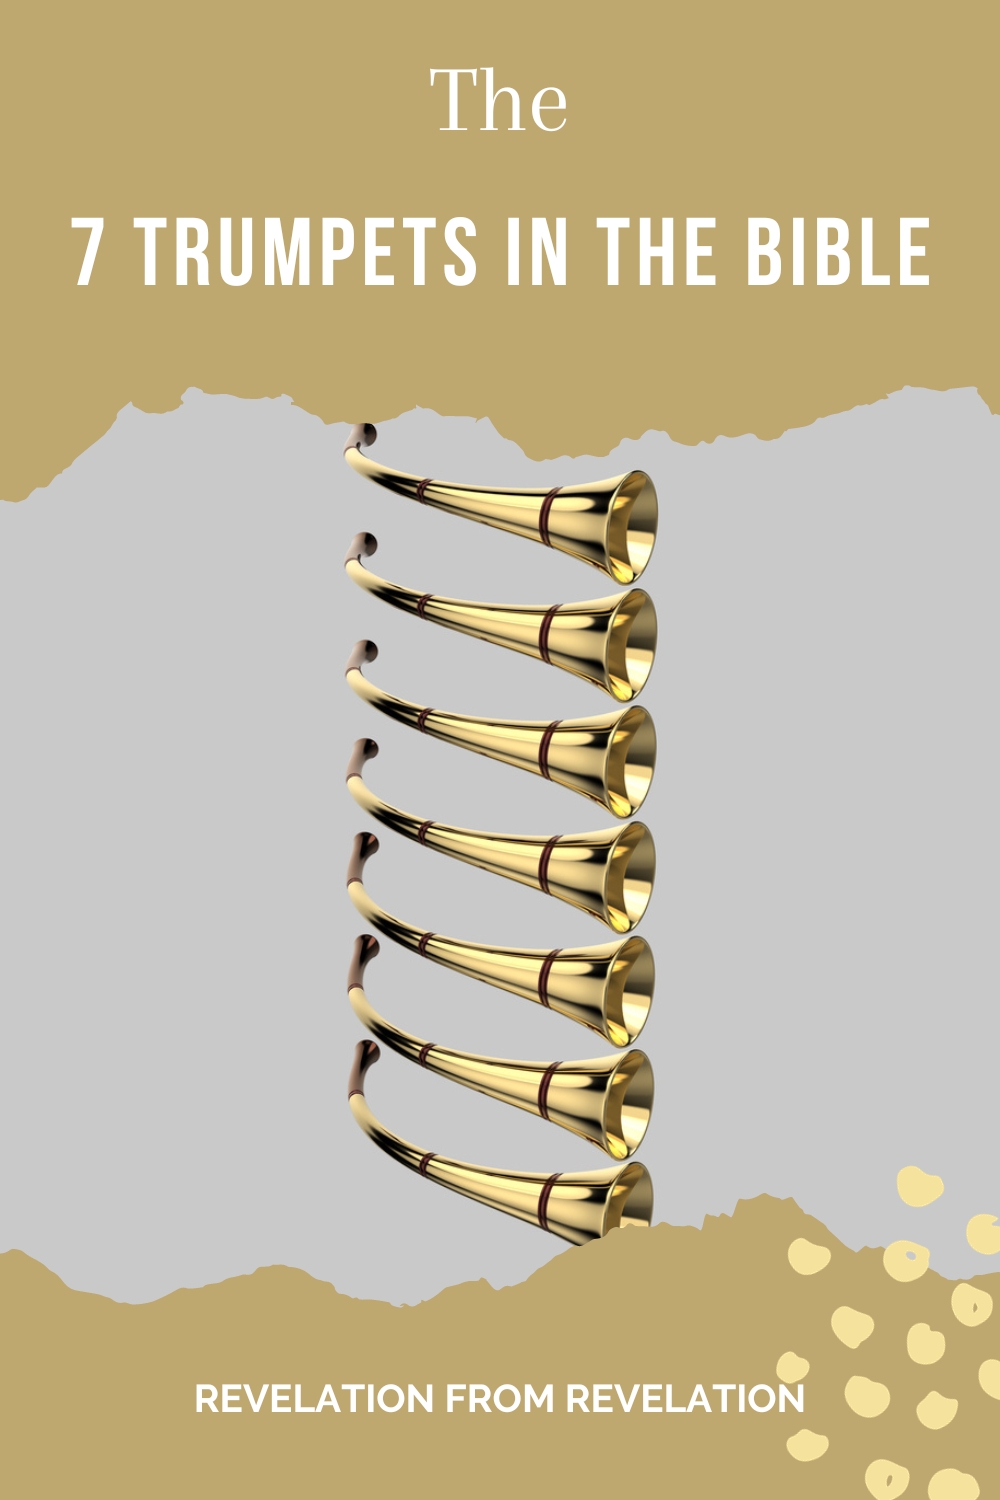 image of 7 gold trumpets with the text the 7 trumpets in the Bible: Revelation from Revelation